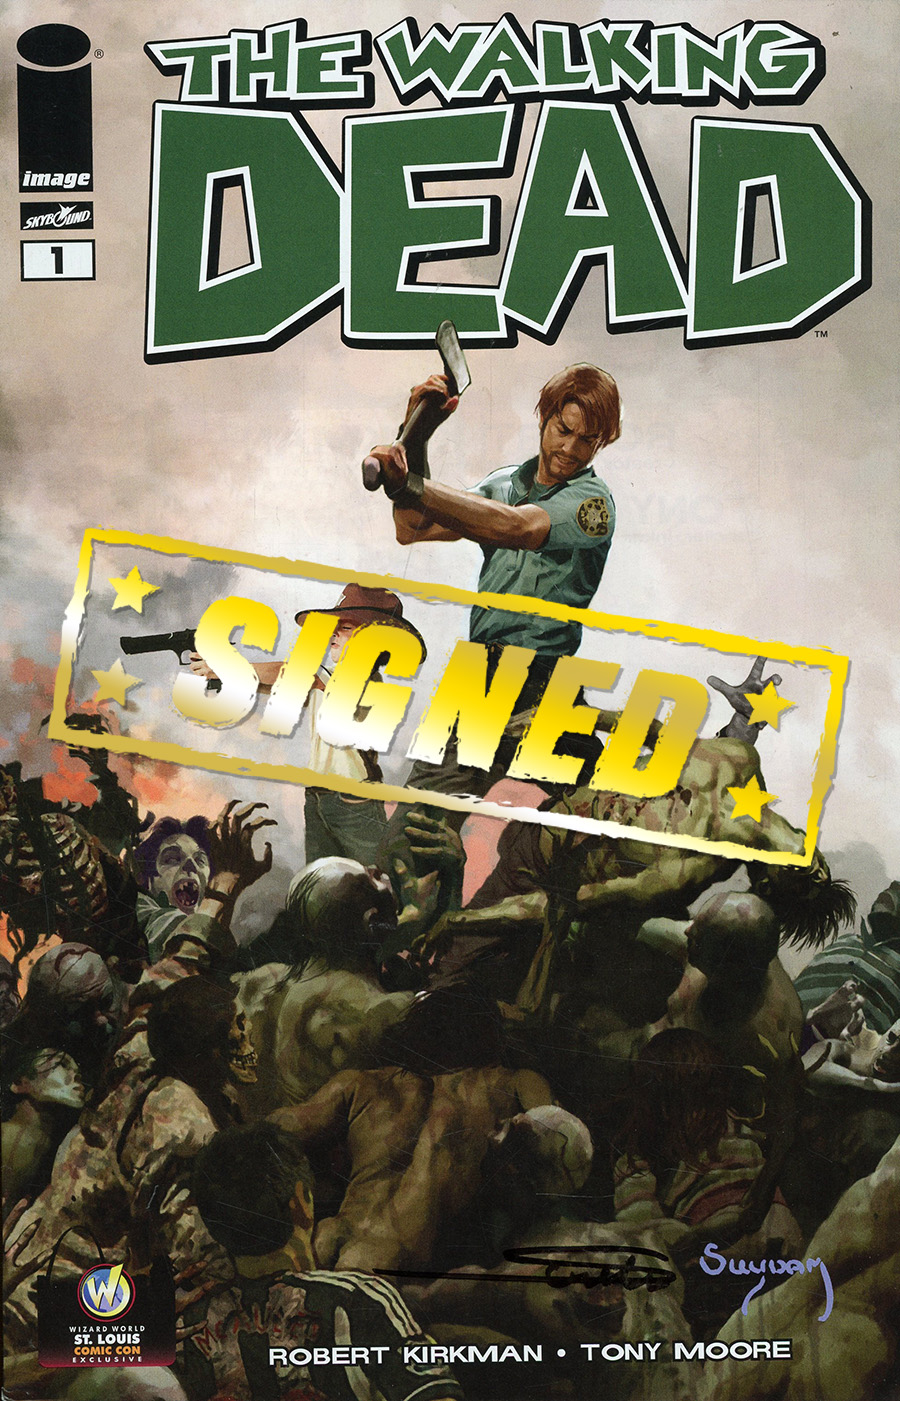 Walking Dead #1 Cover Z-Z-F Wizard World St Louis Exclusive Arthur Suydam Variant Cover Signed By Arthur Suydam Without Certificate